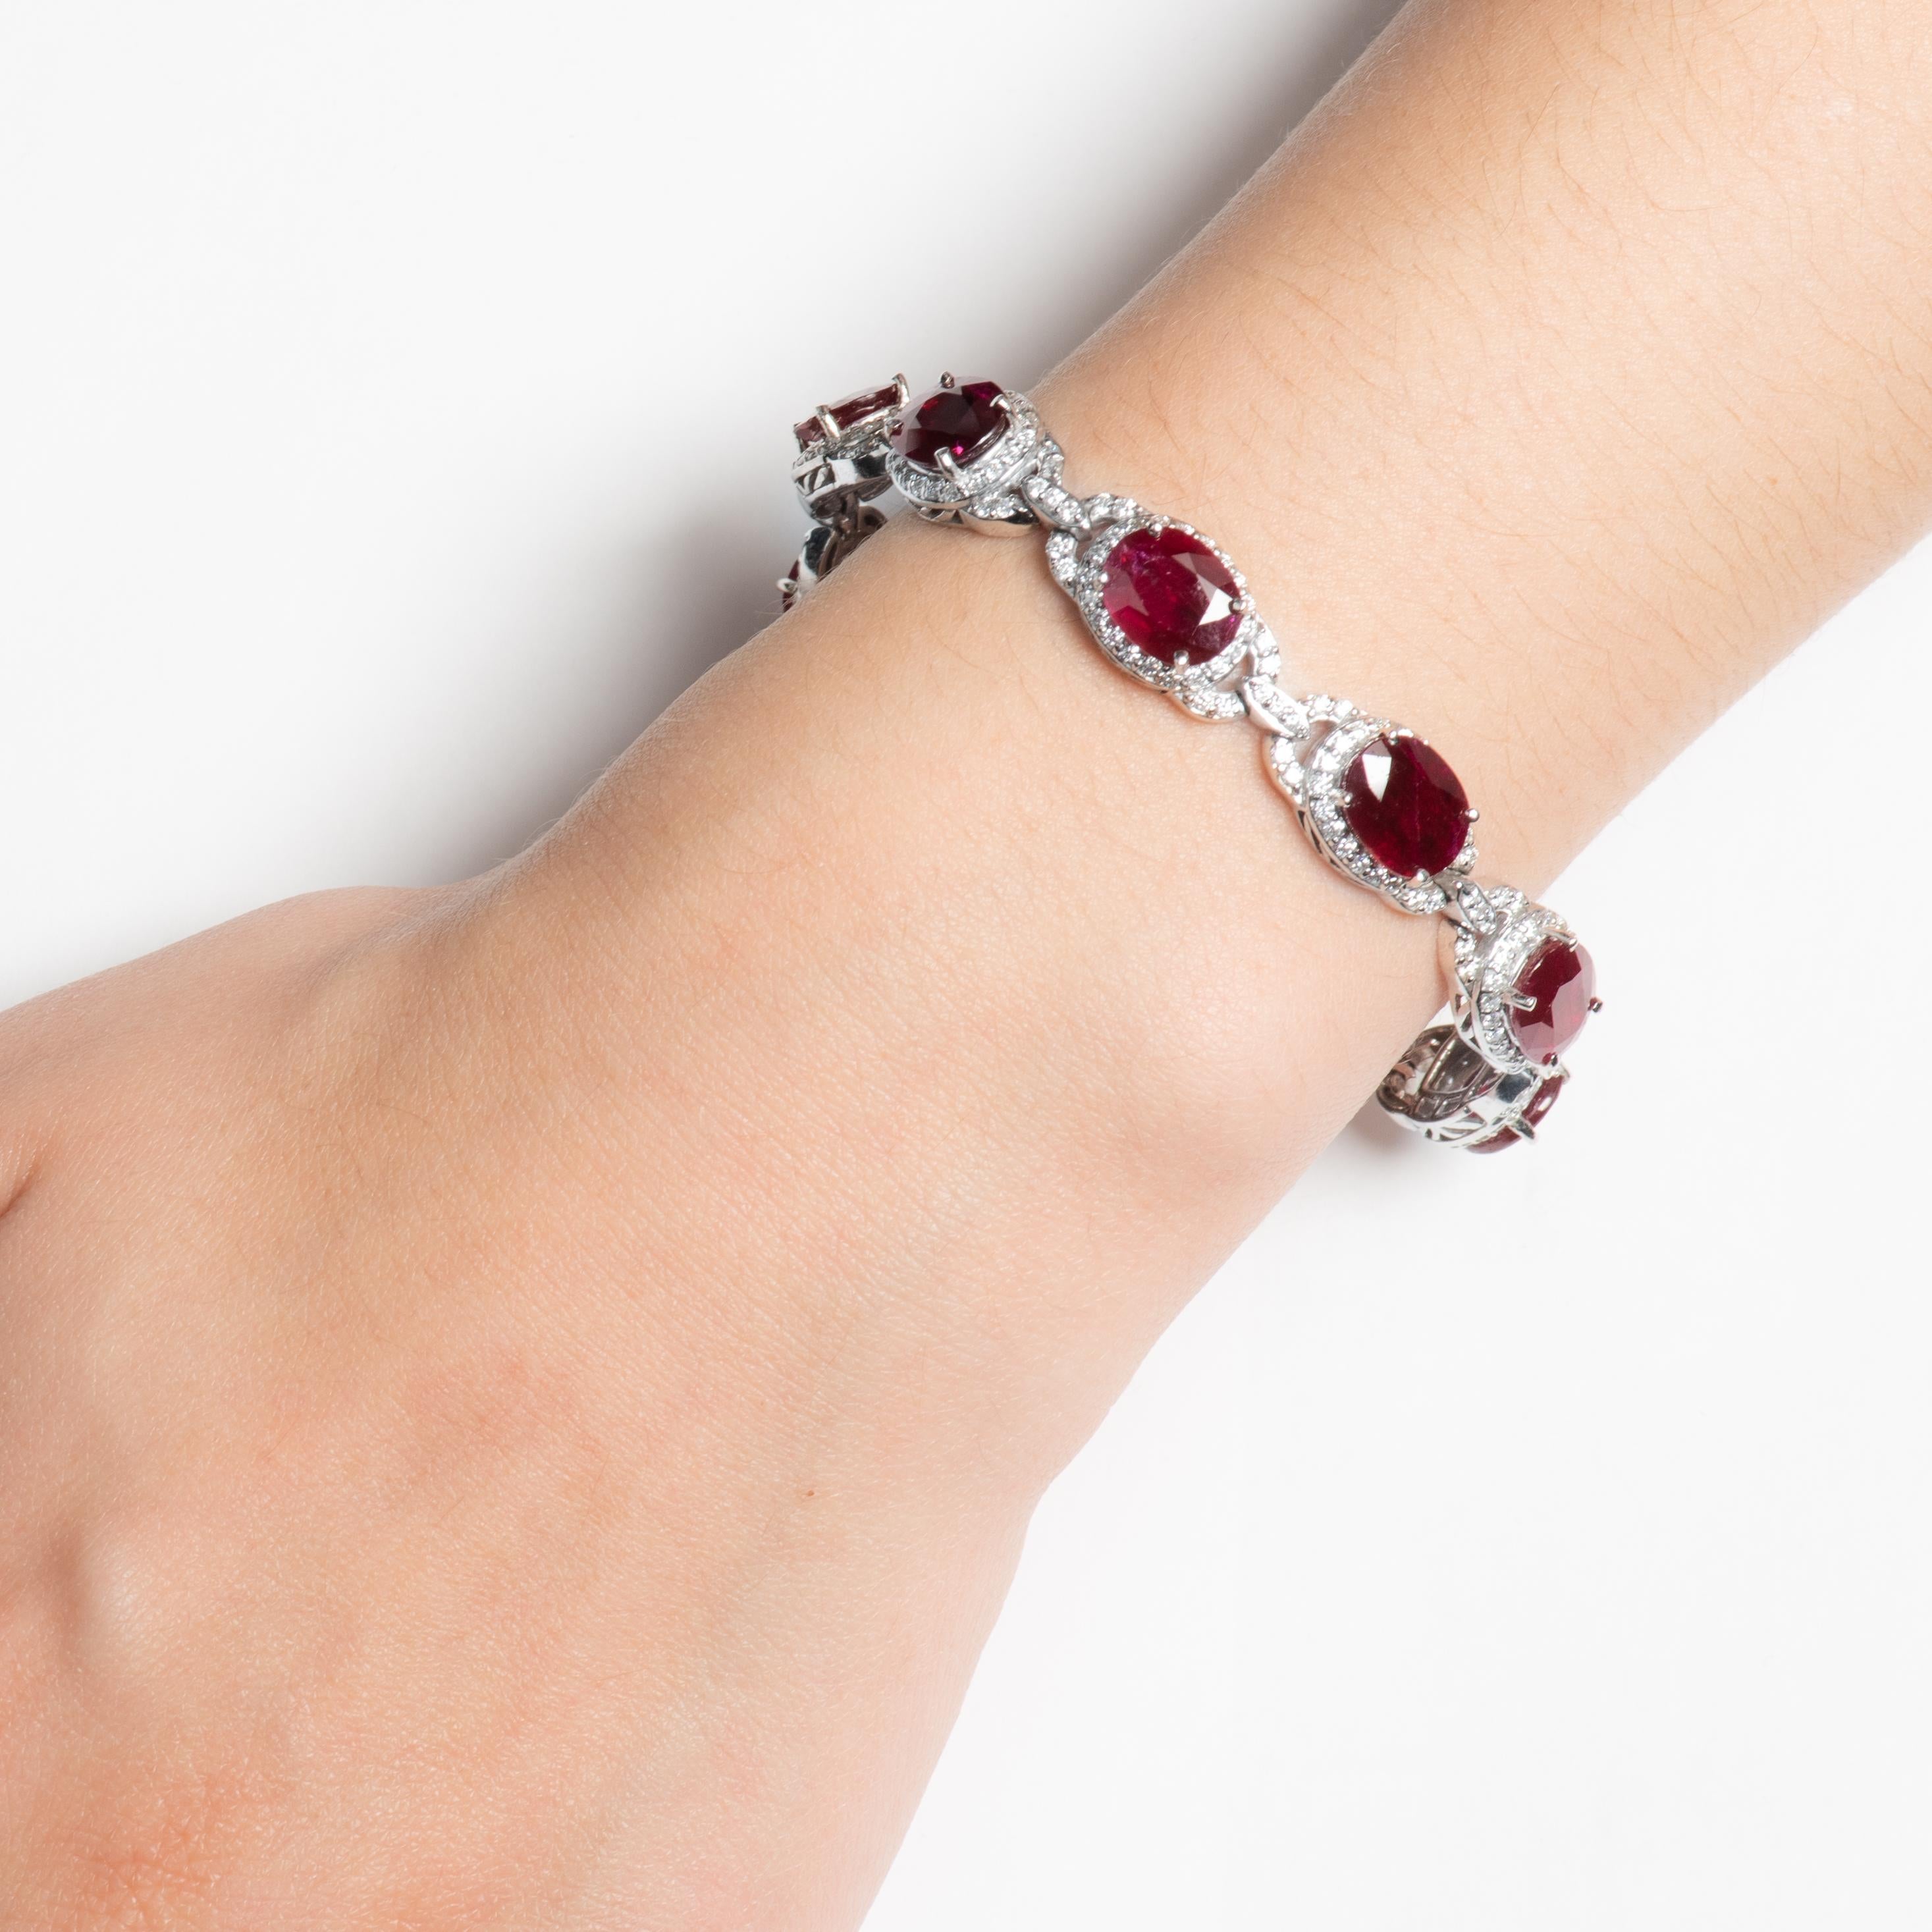 This exquisite bracelet features 22.63ct total weight in oval shaped, intensely red rubies surrounded by 3.44ct total weight in round pave diamonds, linked together. These stones are all set in a 14kt white gold 6.5 inch bracelet. 